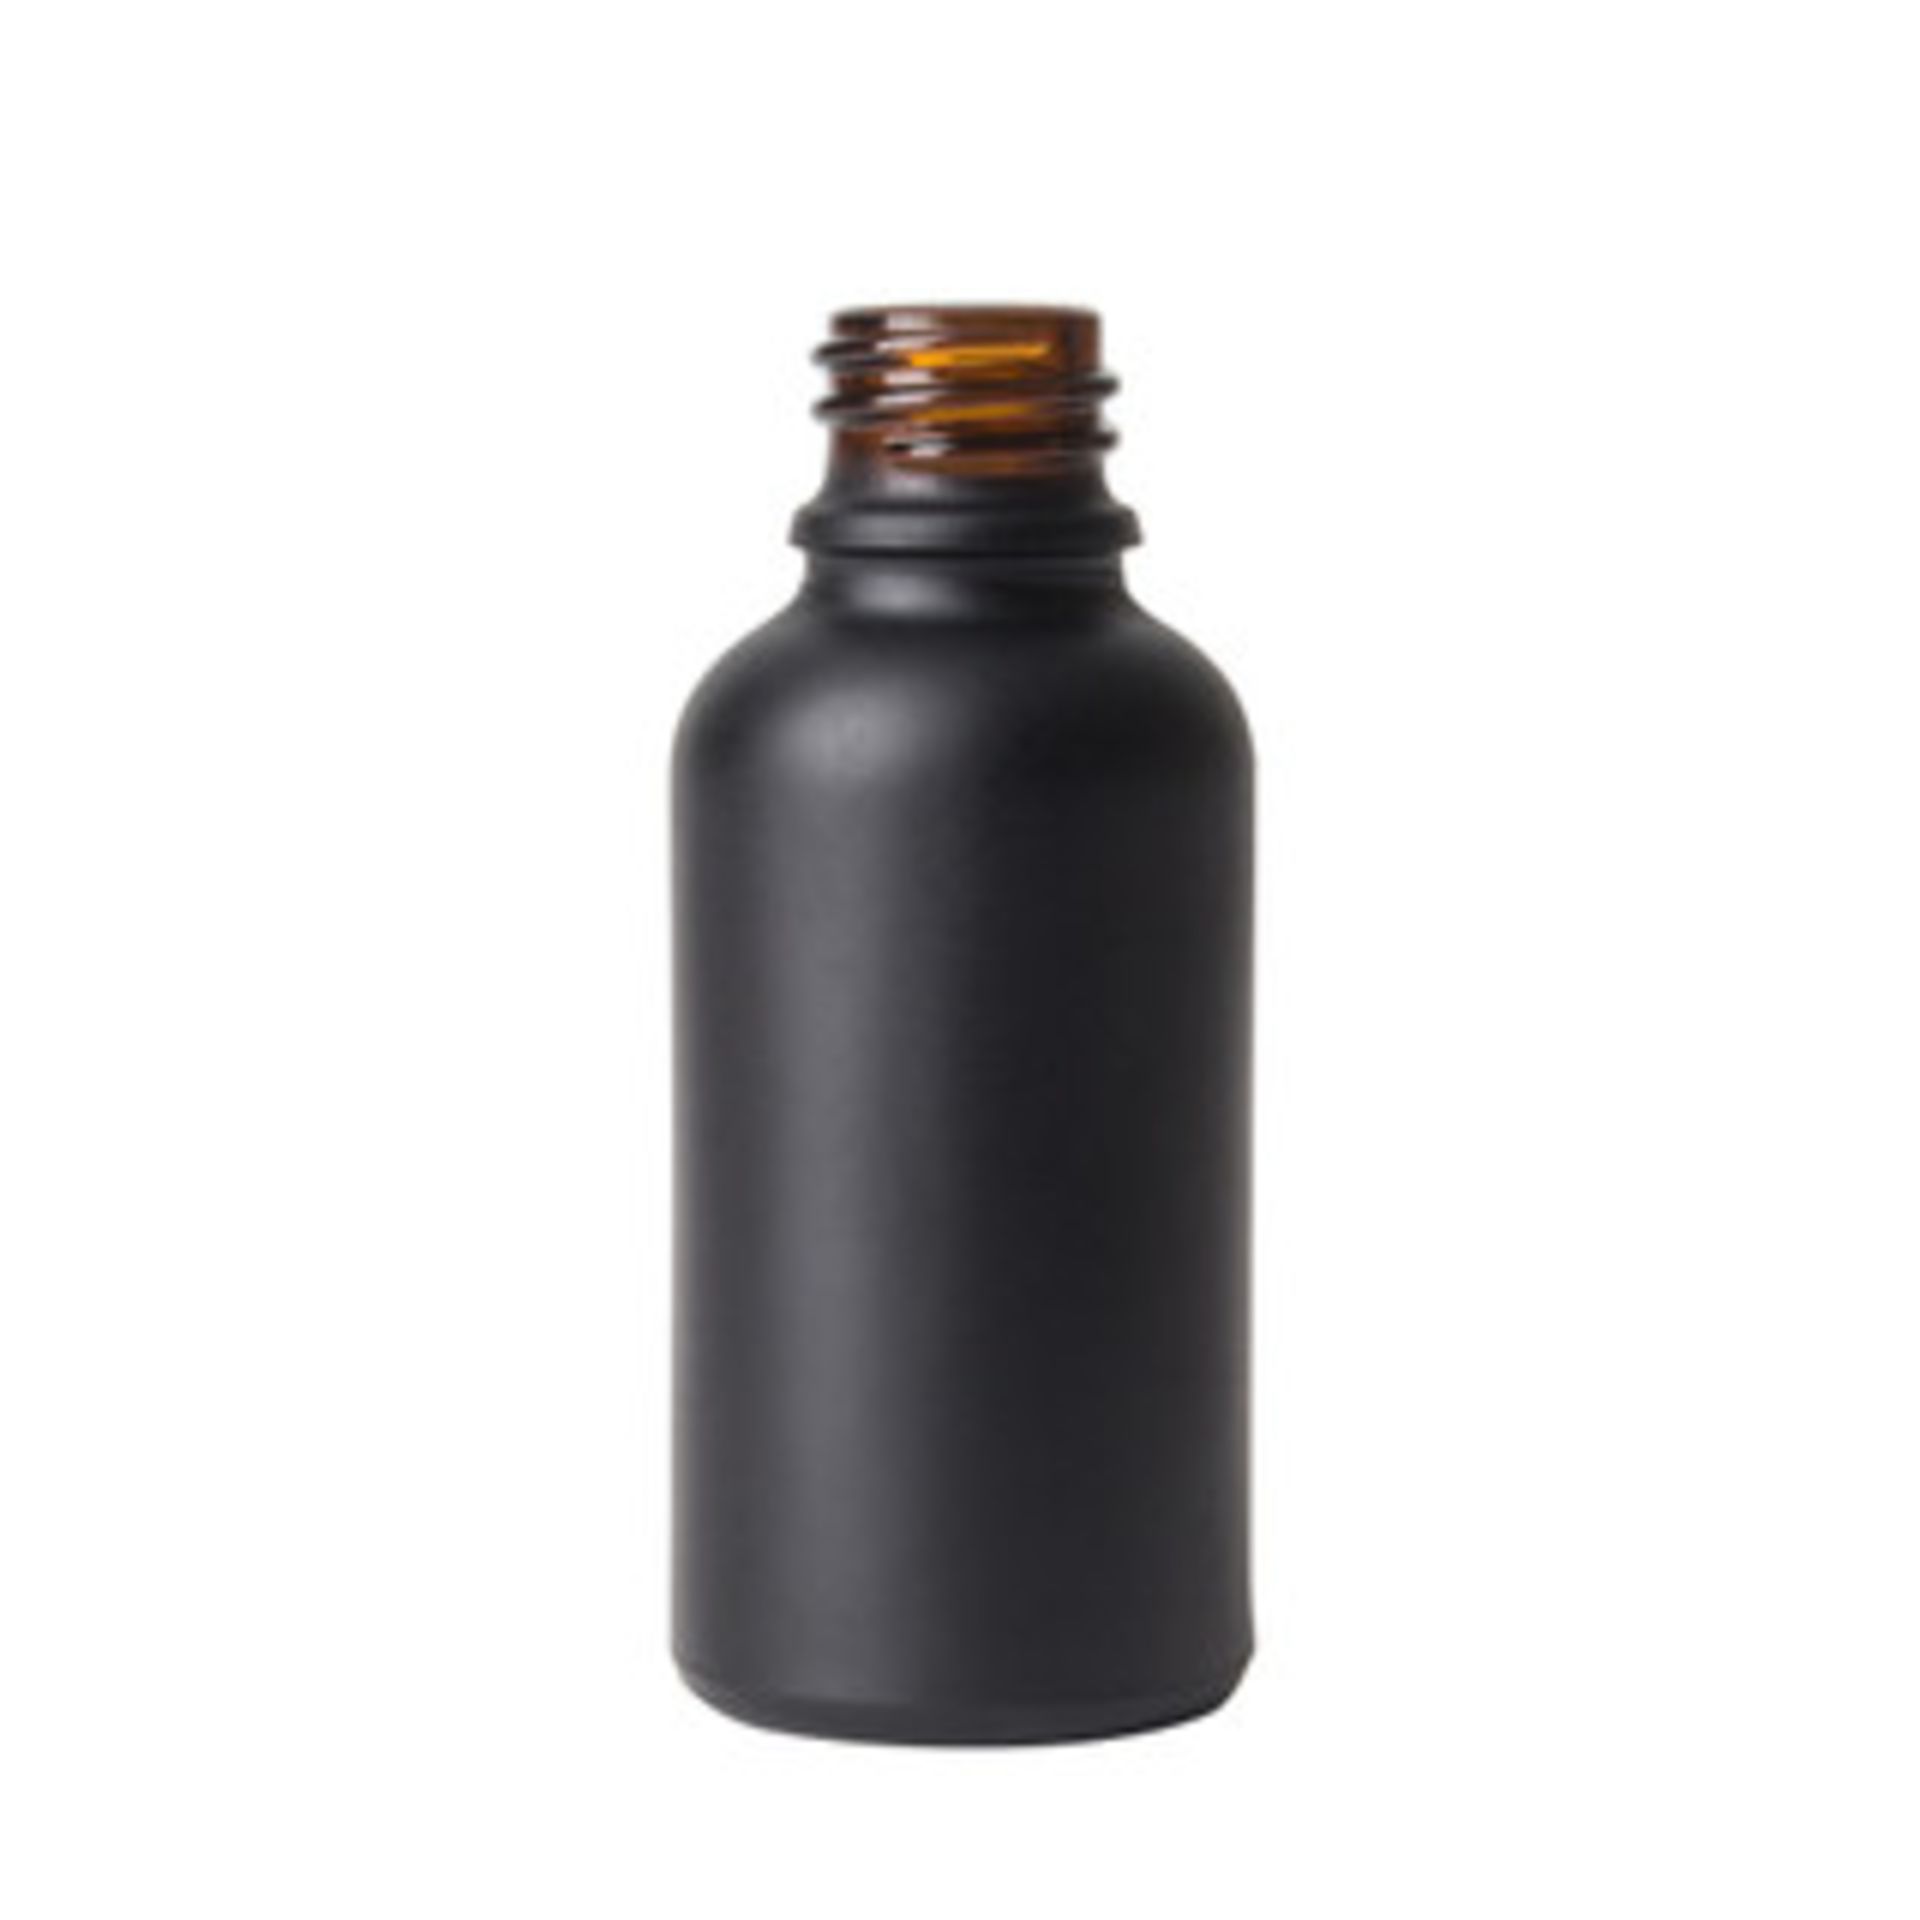 (Located in: Moreno Valley, CA, US) 15mL Matte Black Glass Dropper Bottle (18/410), Aprox Qty 32,760